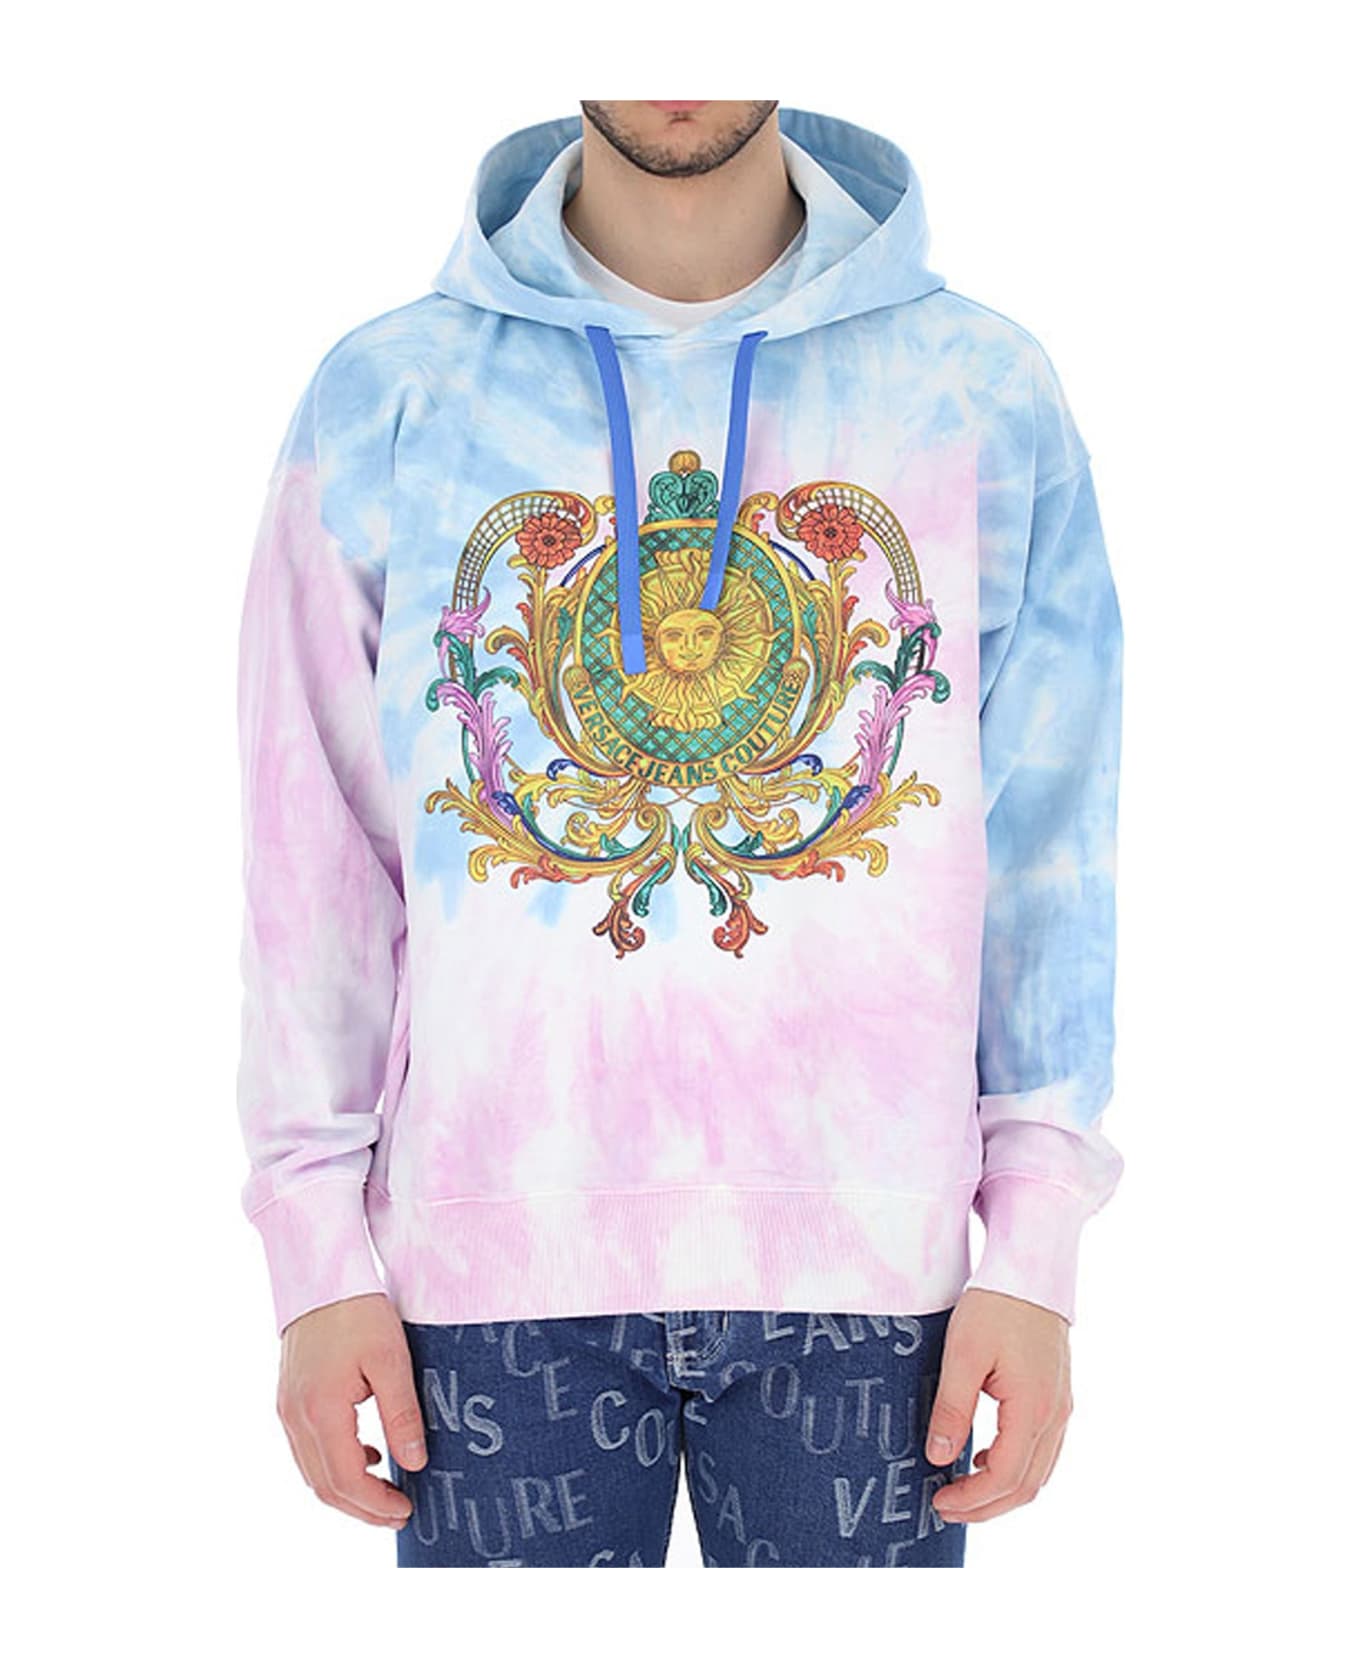 Versace Jeans Couture Jeans Couture Hooded Sweatshirt - Blue